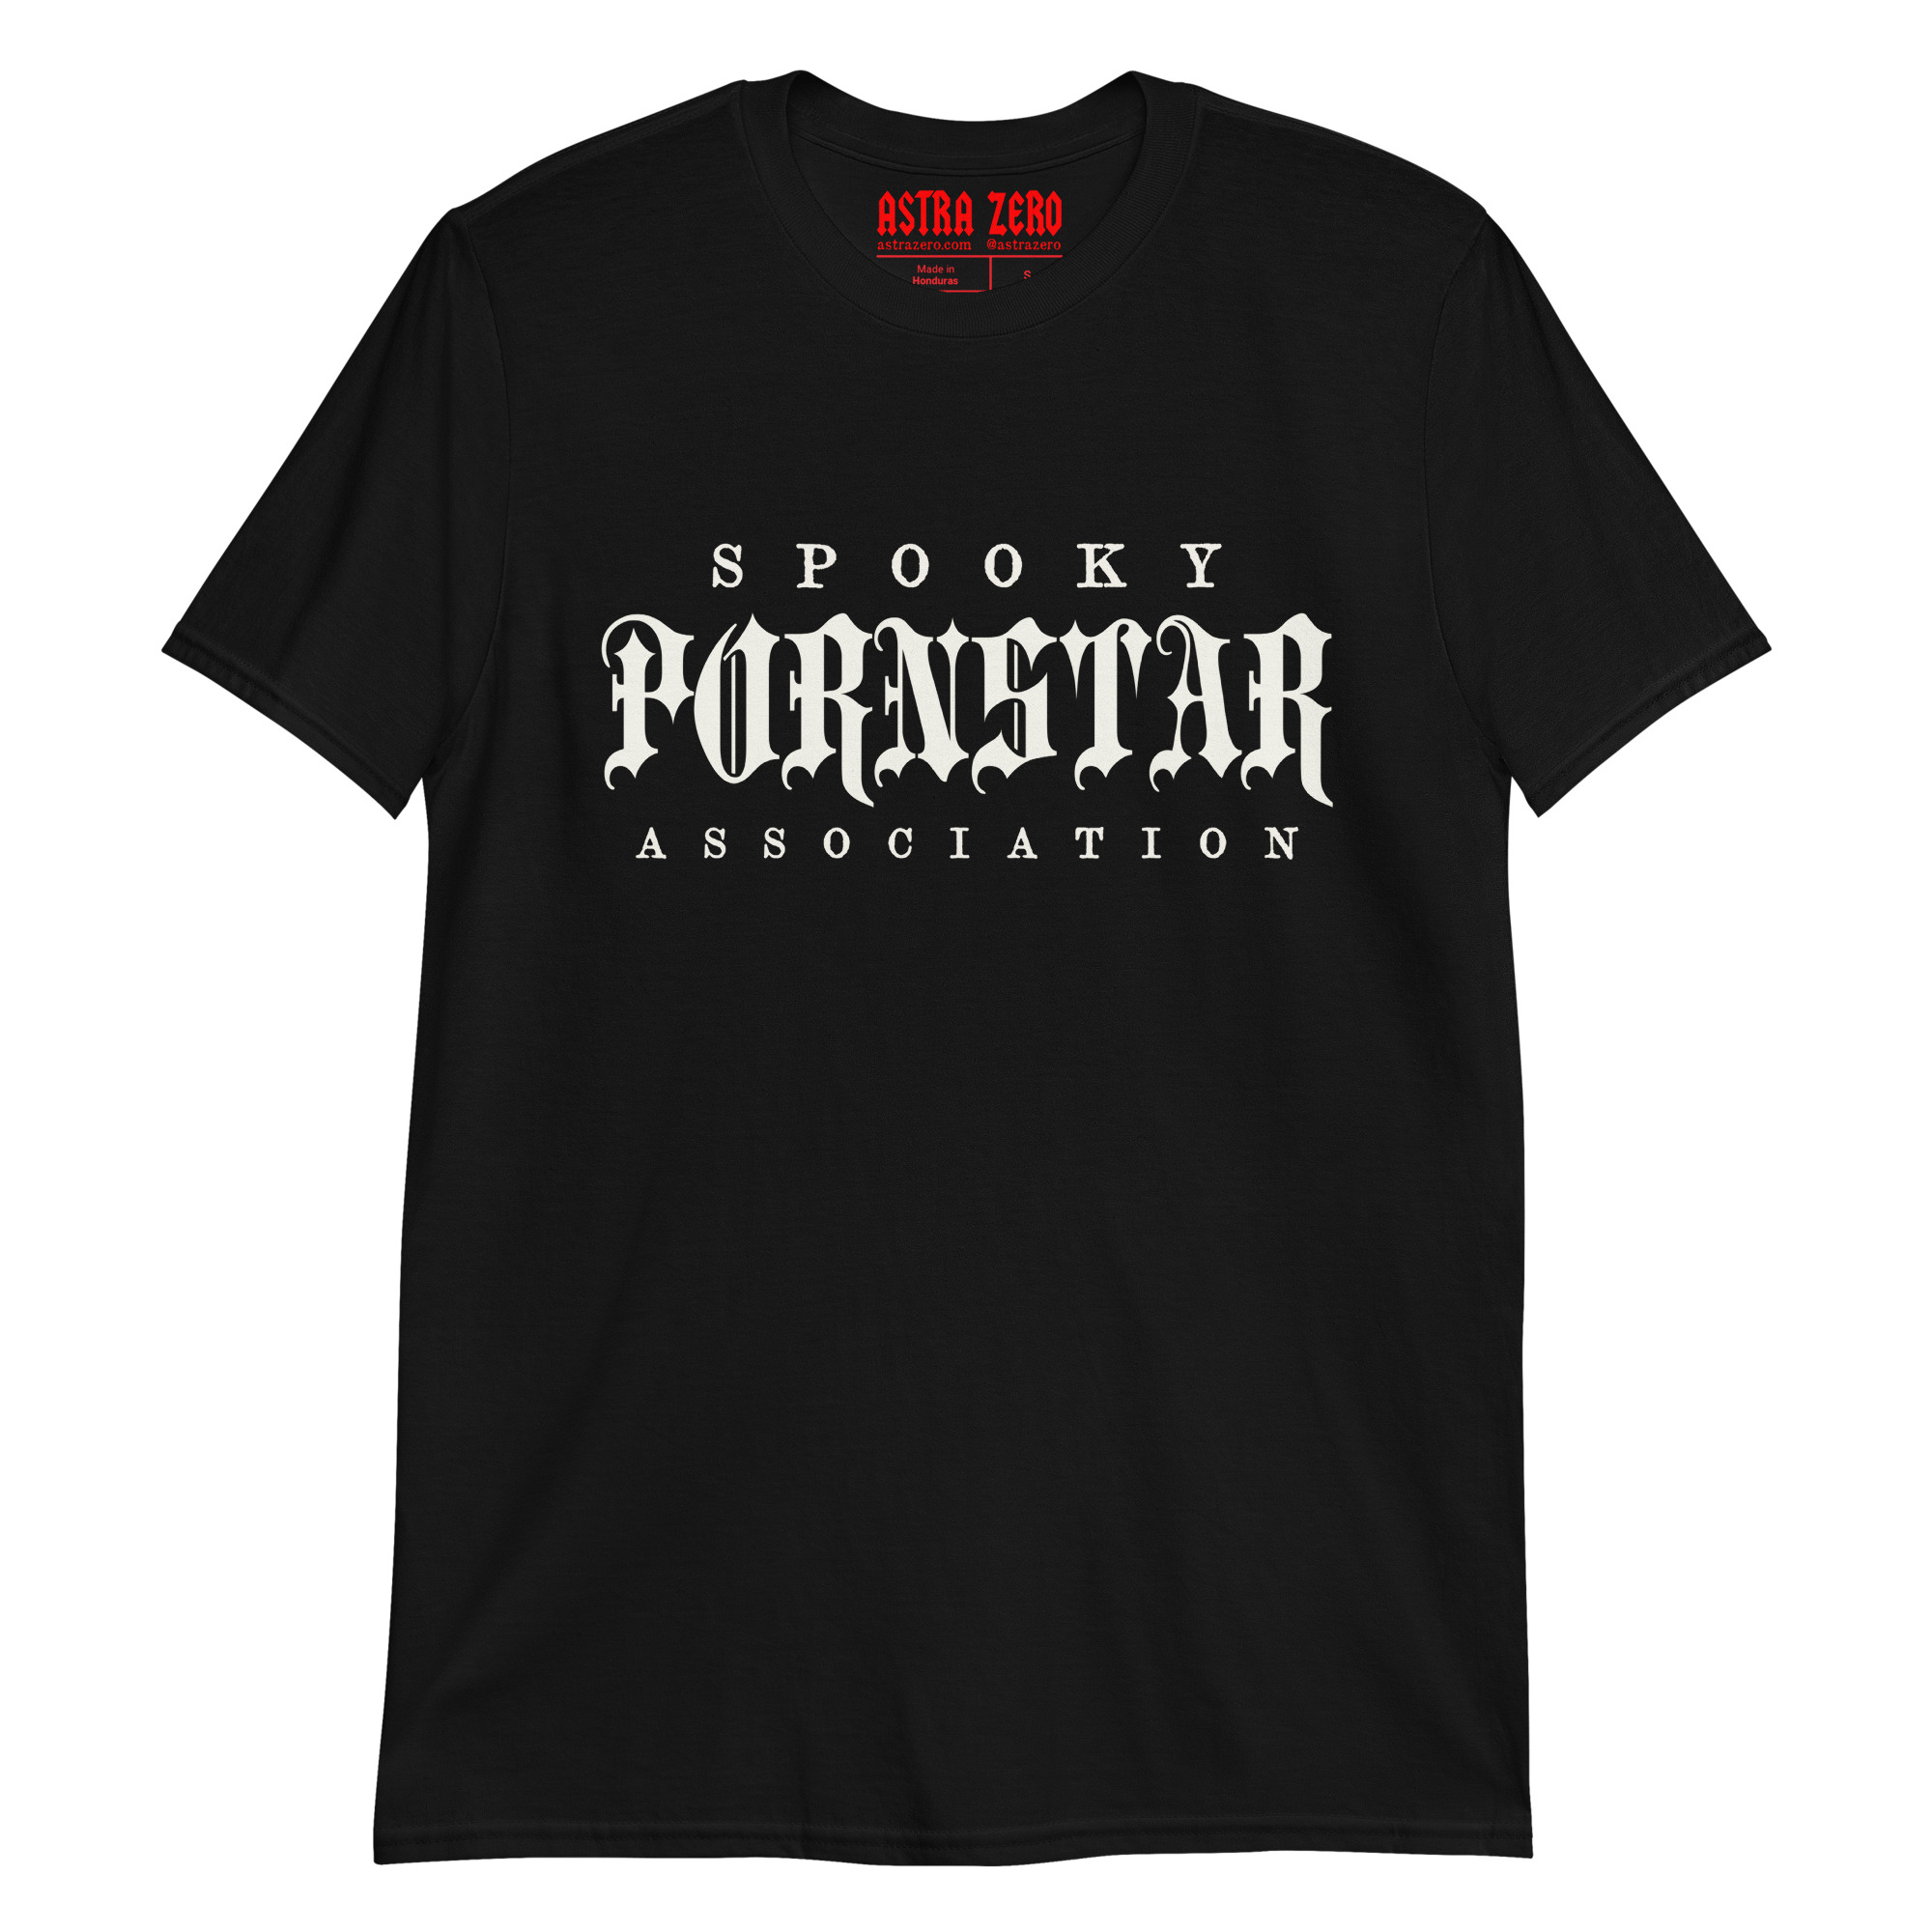 Featured image for “Spooky PornStar - Short-Sleeve Unisex T-Shirt”